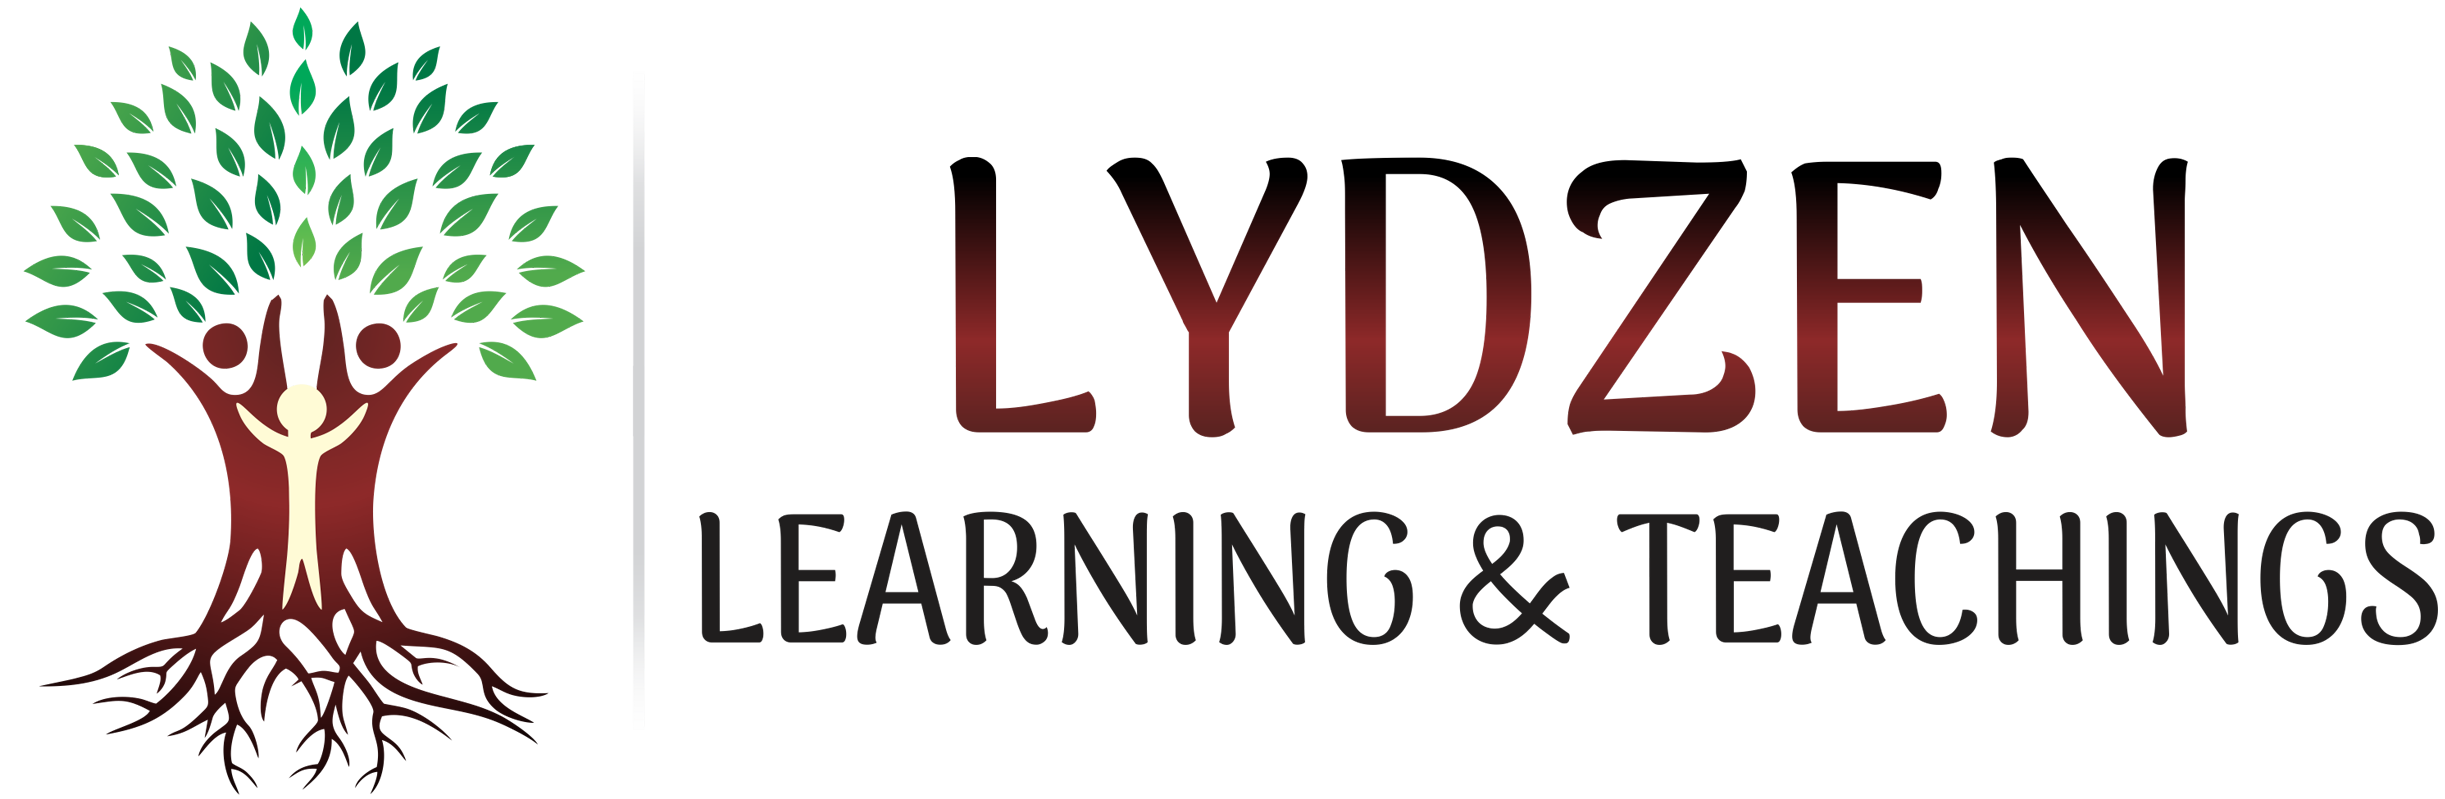 Lydzen Learning and Teachings Logo